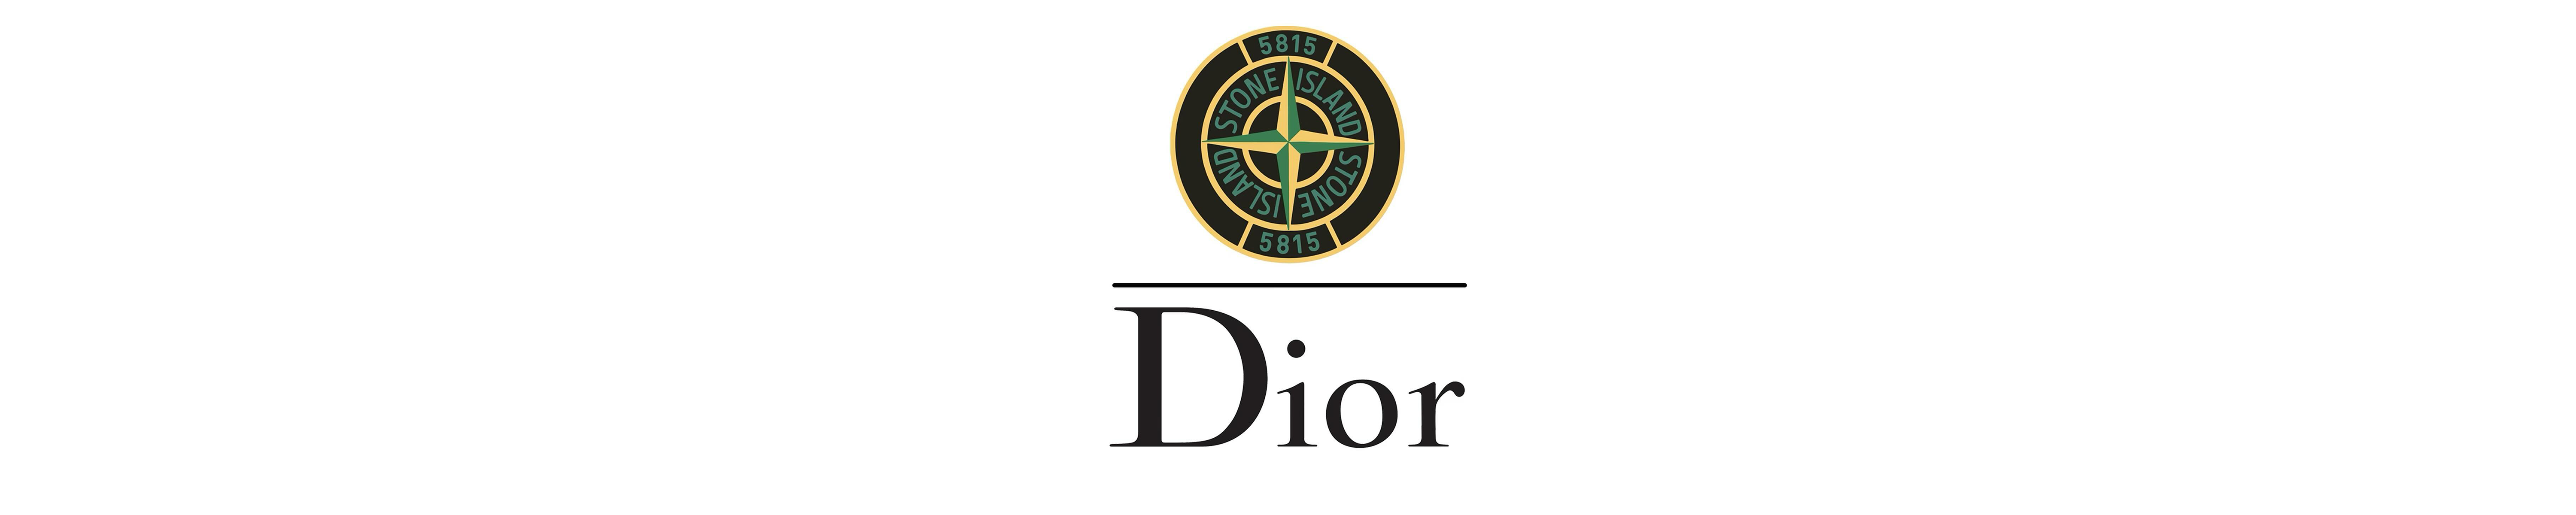 Stone Island and Dior Are Set to Launch a Limited-Edition Capsule Collection